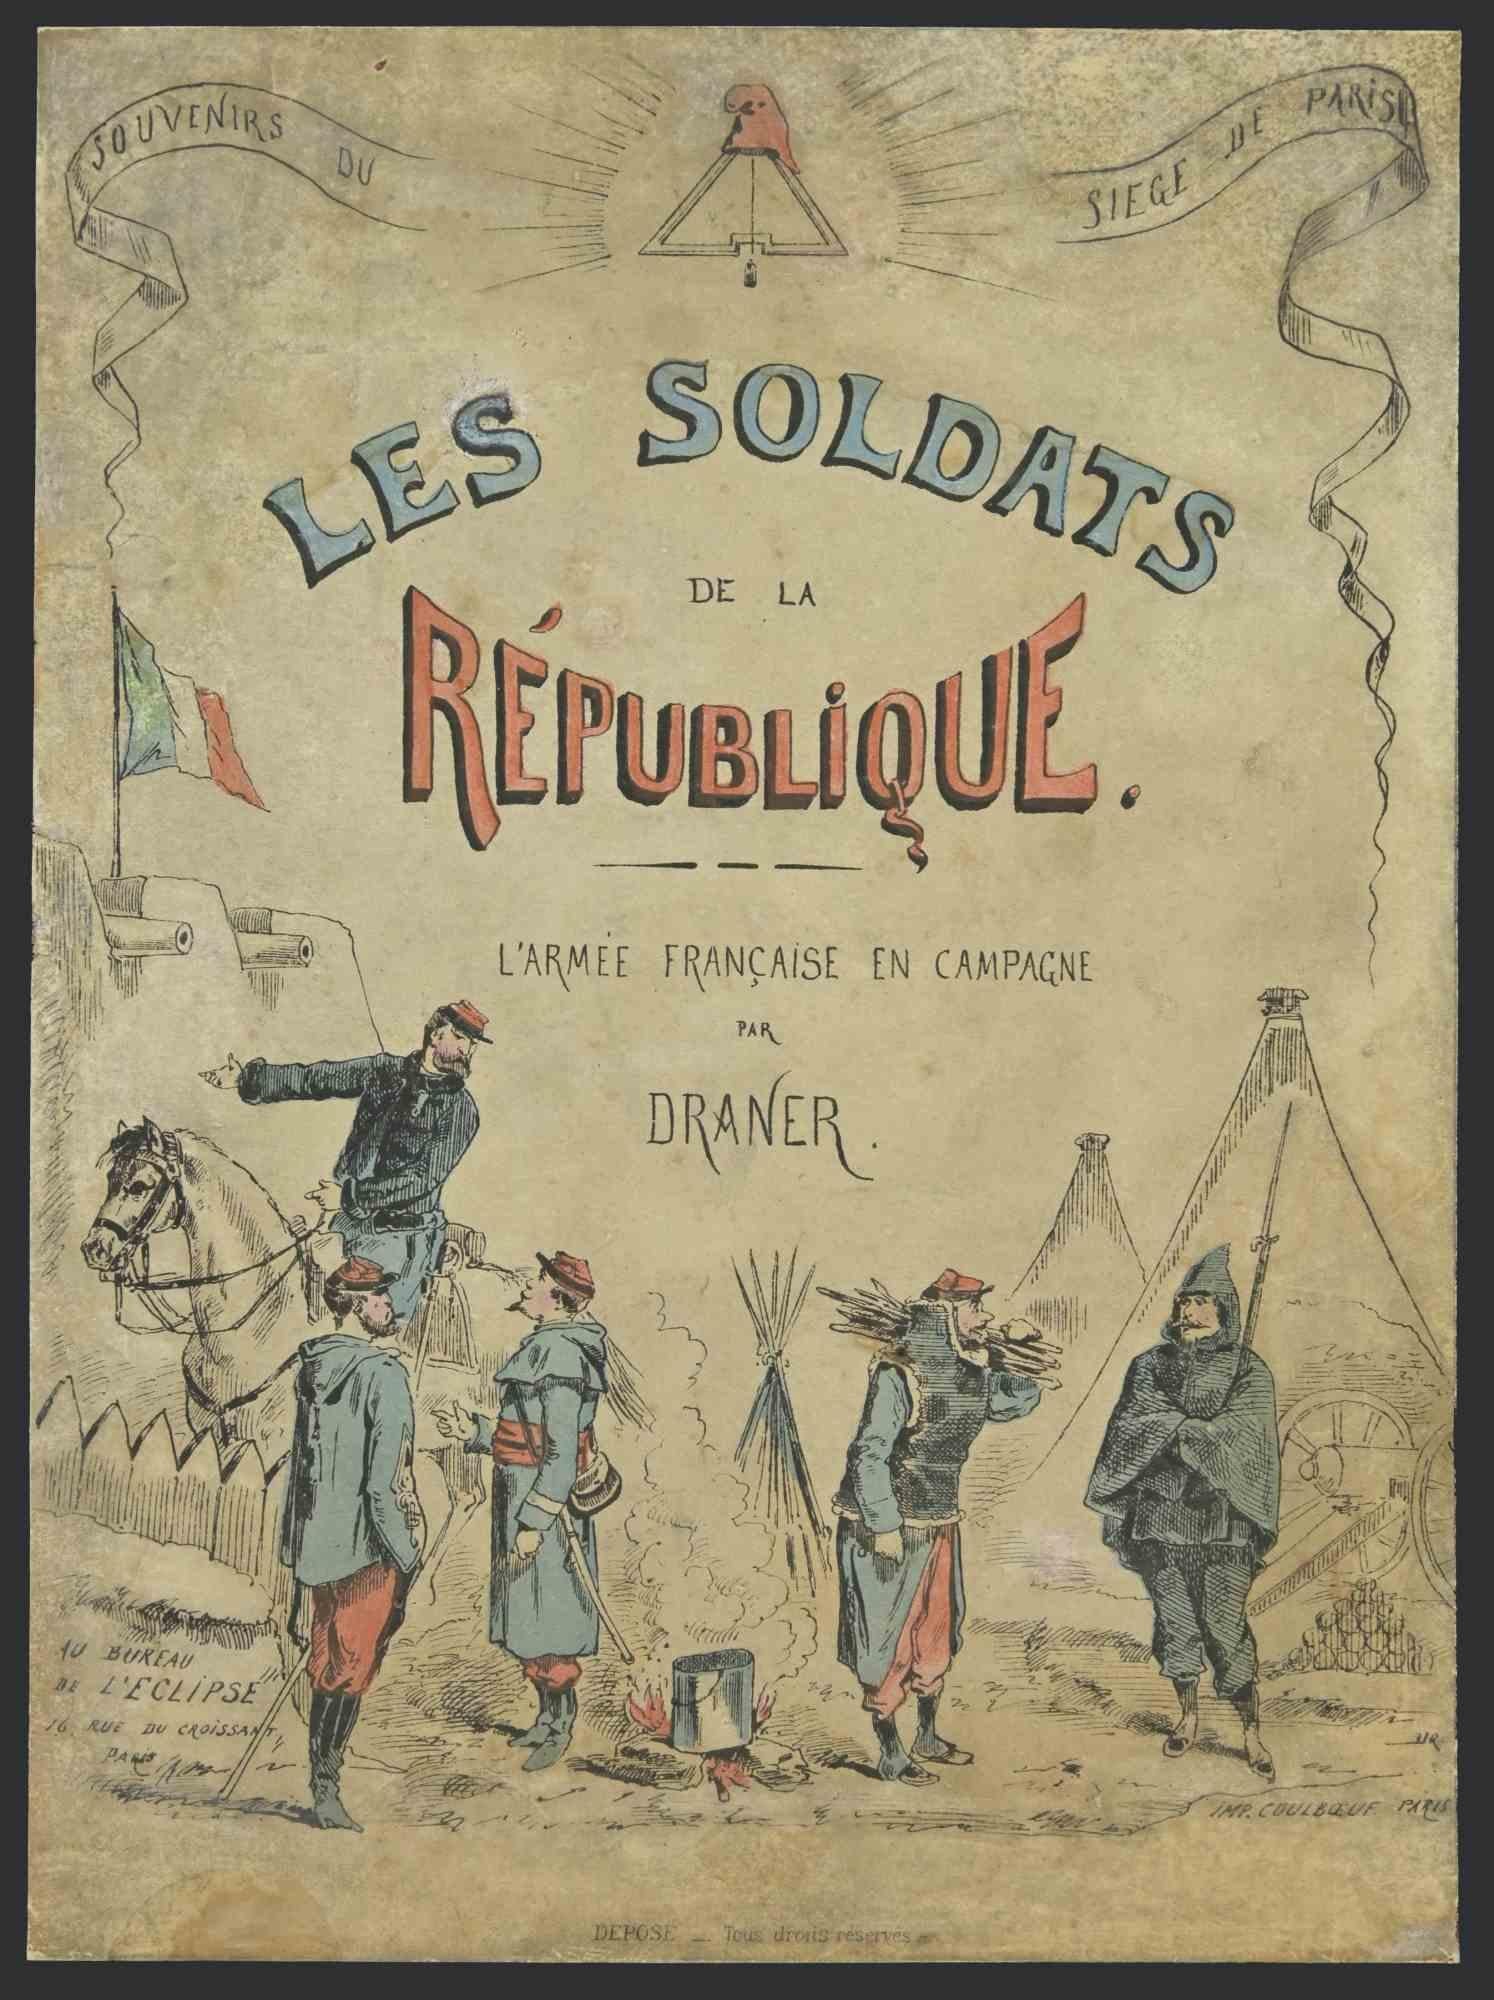 Les Soldats de la Republique is an lithograph on paper realized by Draner in 1871.

The artwork is in good condition.

